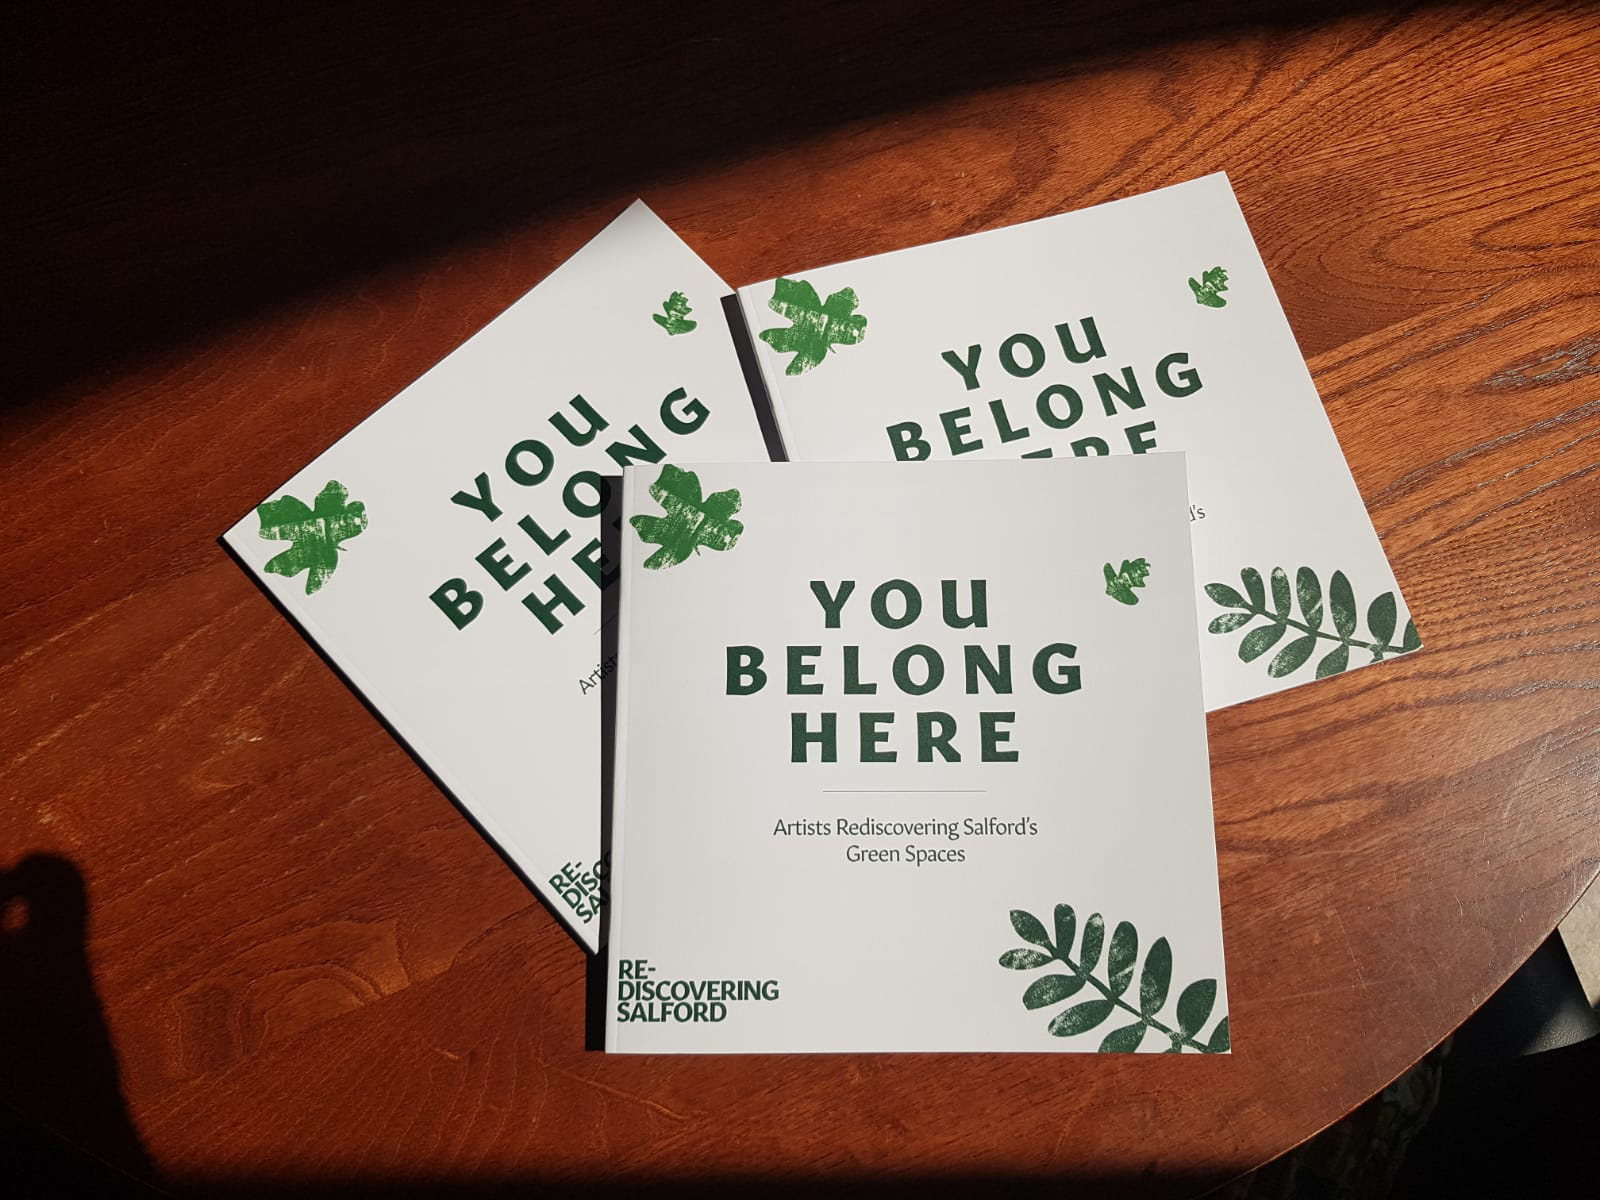 Three white square booklets are piled together on a wooden table. The cover reads "You Belong Here" and has a green leaf pattern. The booklets are an exhibition brochure. 